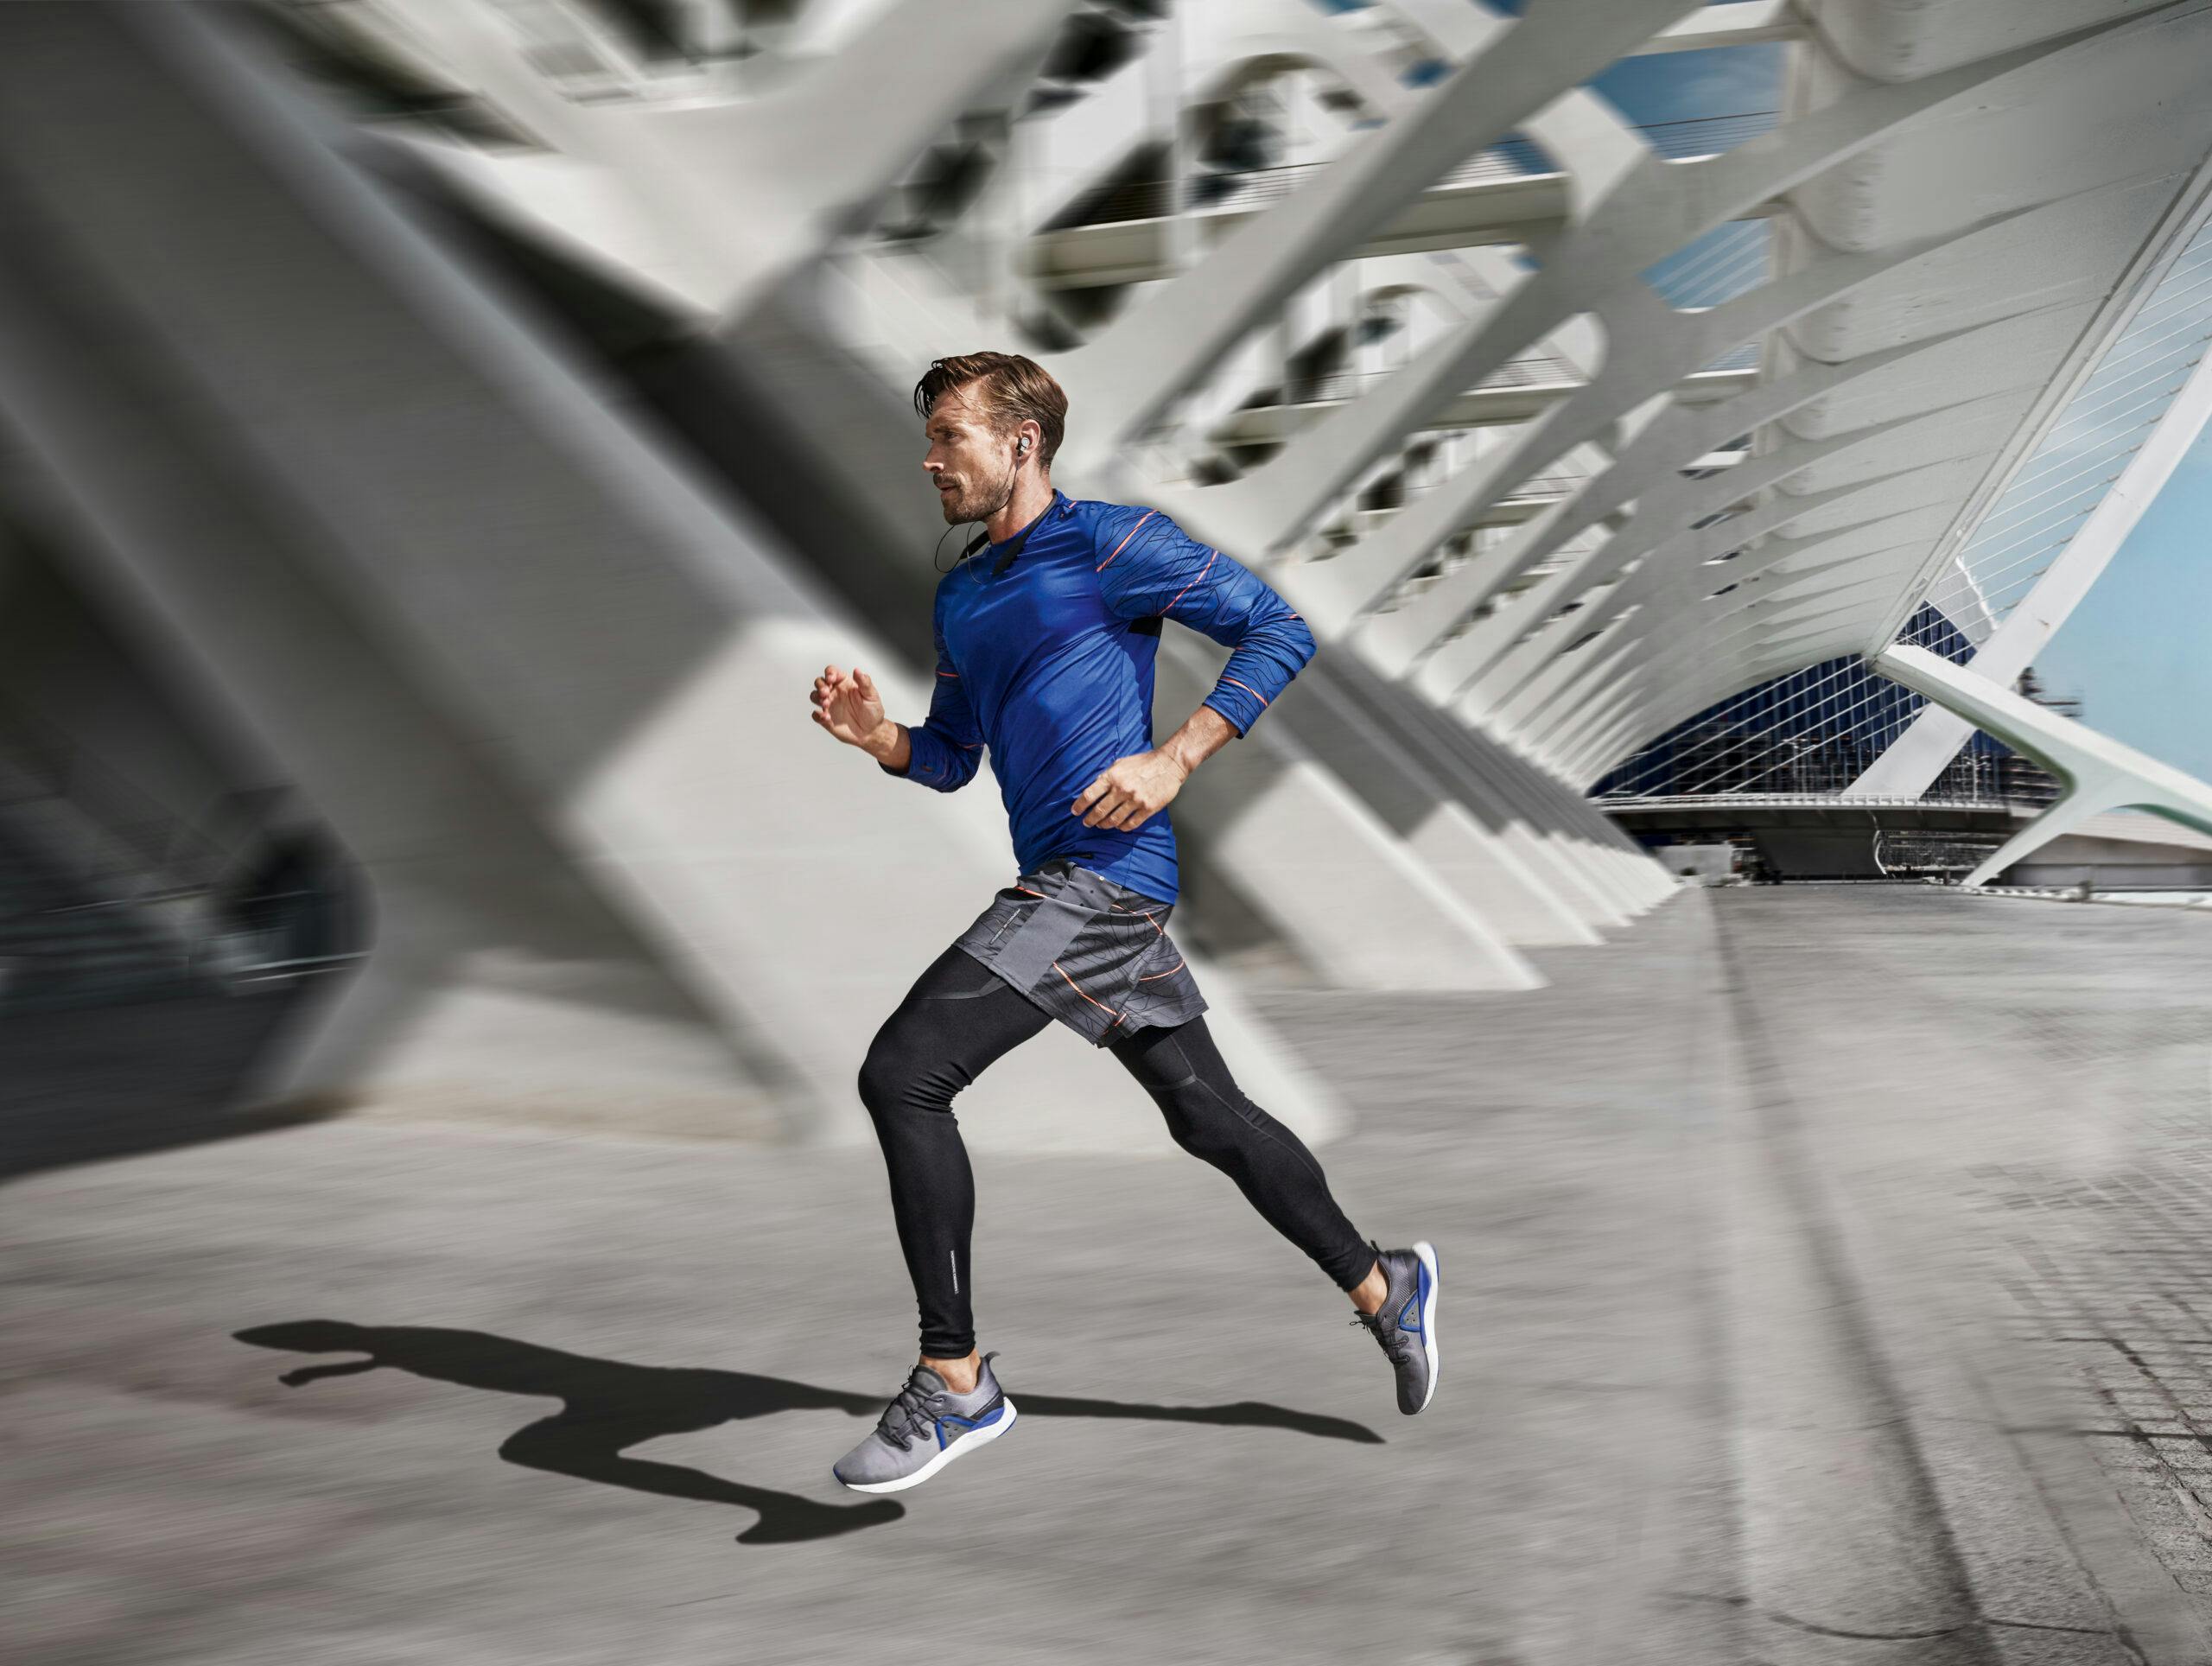 Porsche Design and PUMA celebrate the launch of a new sportswear collection